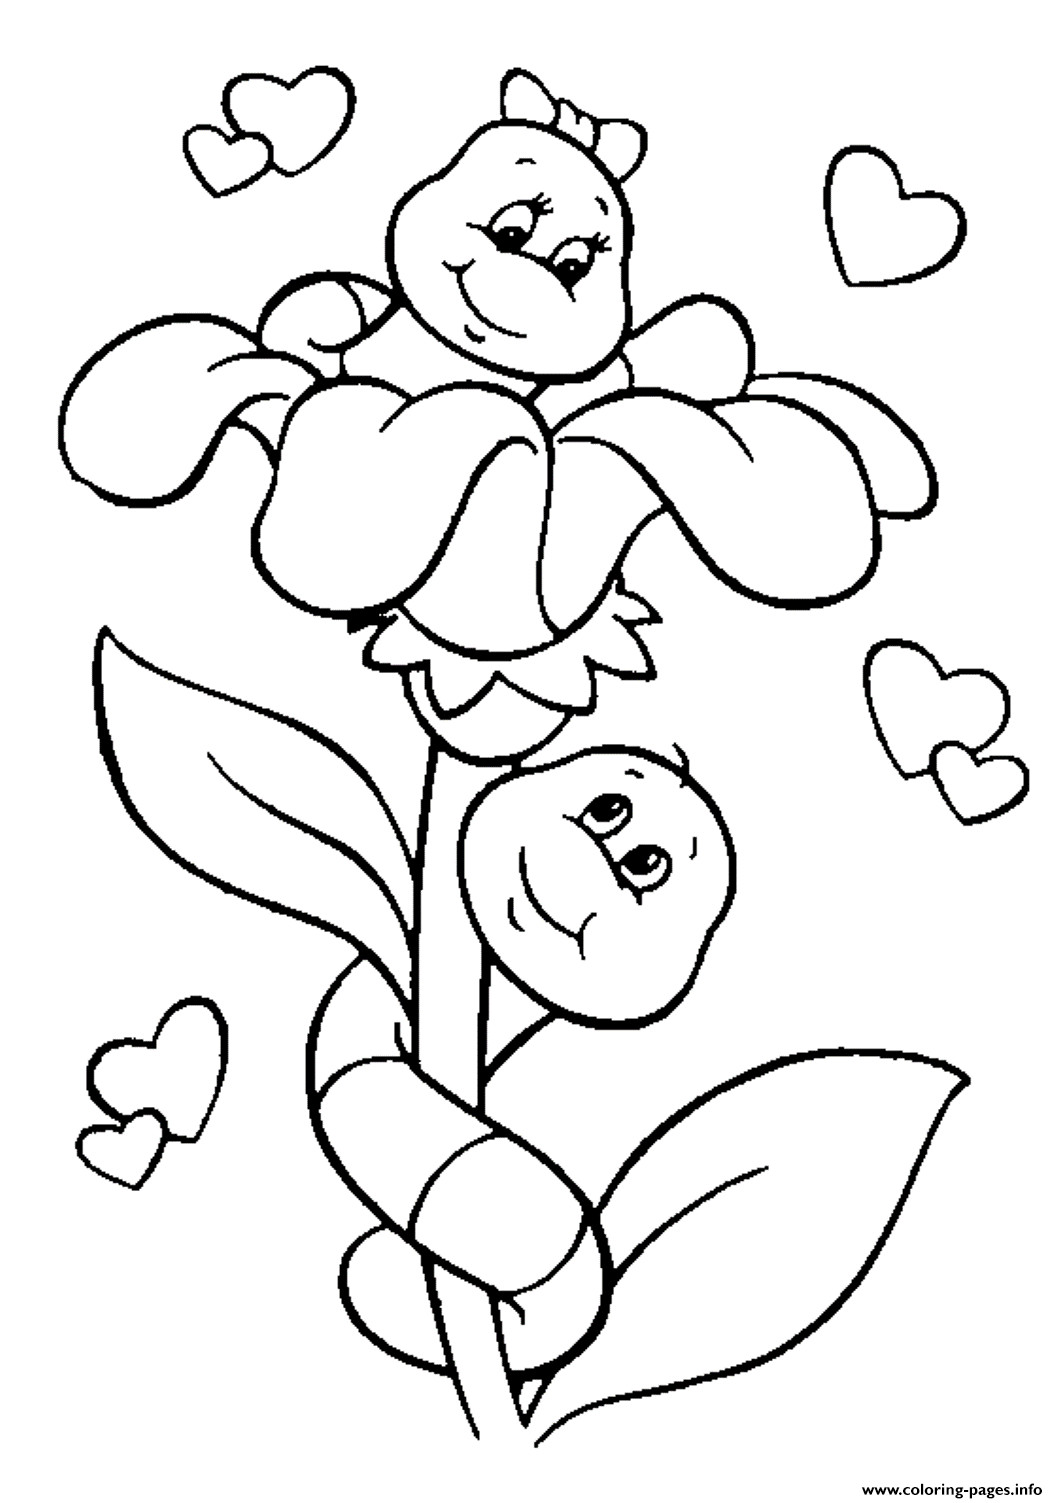 Valentines Coloring Sheets For Kids
 Flower And Caterpillar In Love Valentine S9195 Coloring